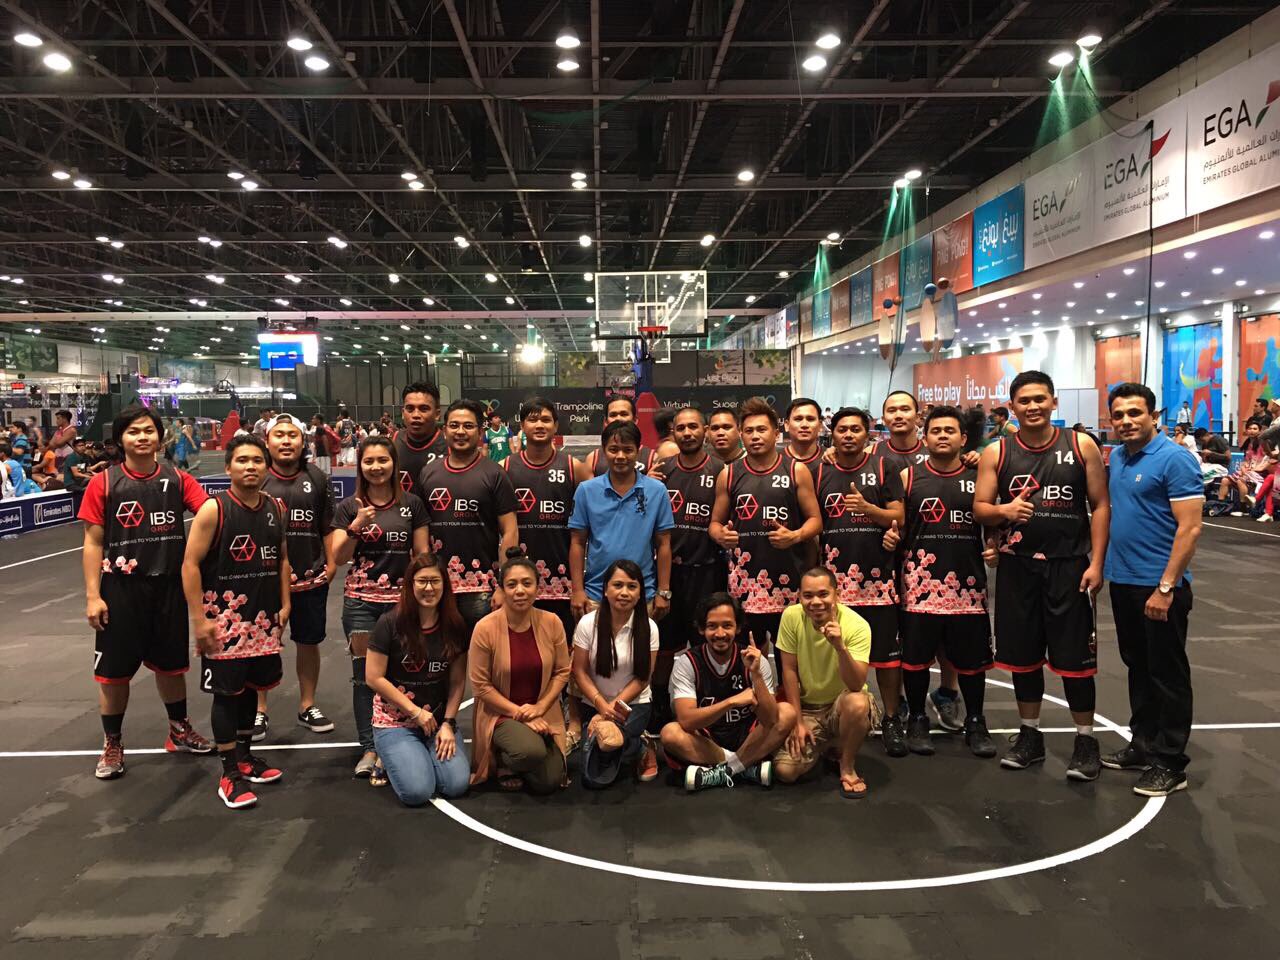 præst Mellem mini IBS Group on Twitter: "Congratulations IBS Team on winning the First game  and Best Muse at Pinoy Technical Production Crew (PTPC) Basketball League  Season 2. https://t.co/4e2DGjKAR8" / Twitter